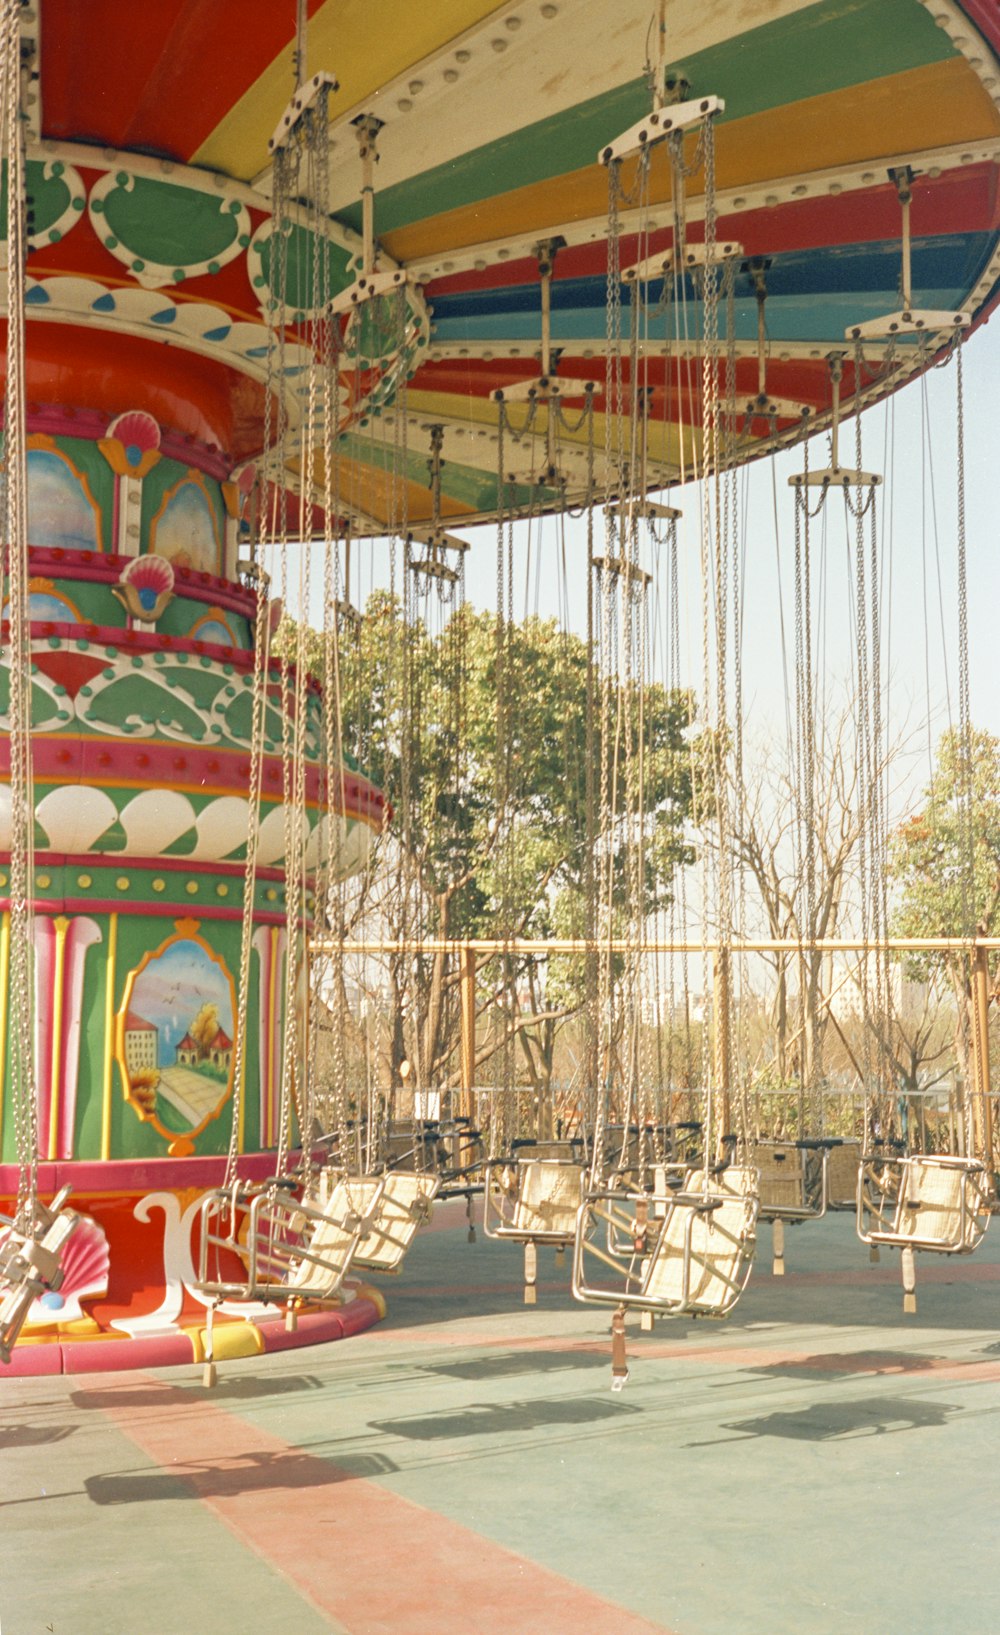 a carnival ride with swings and a carousel